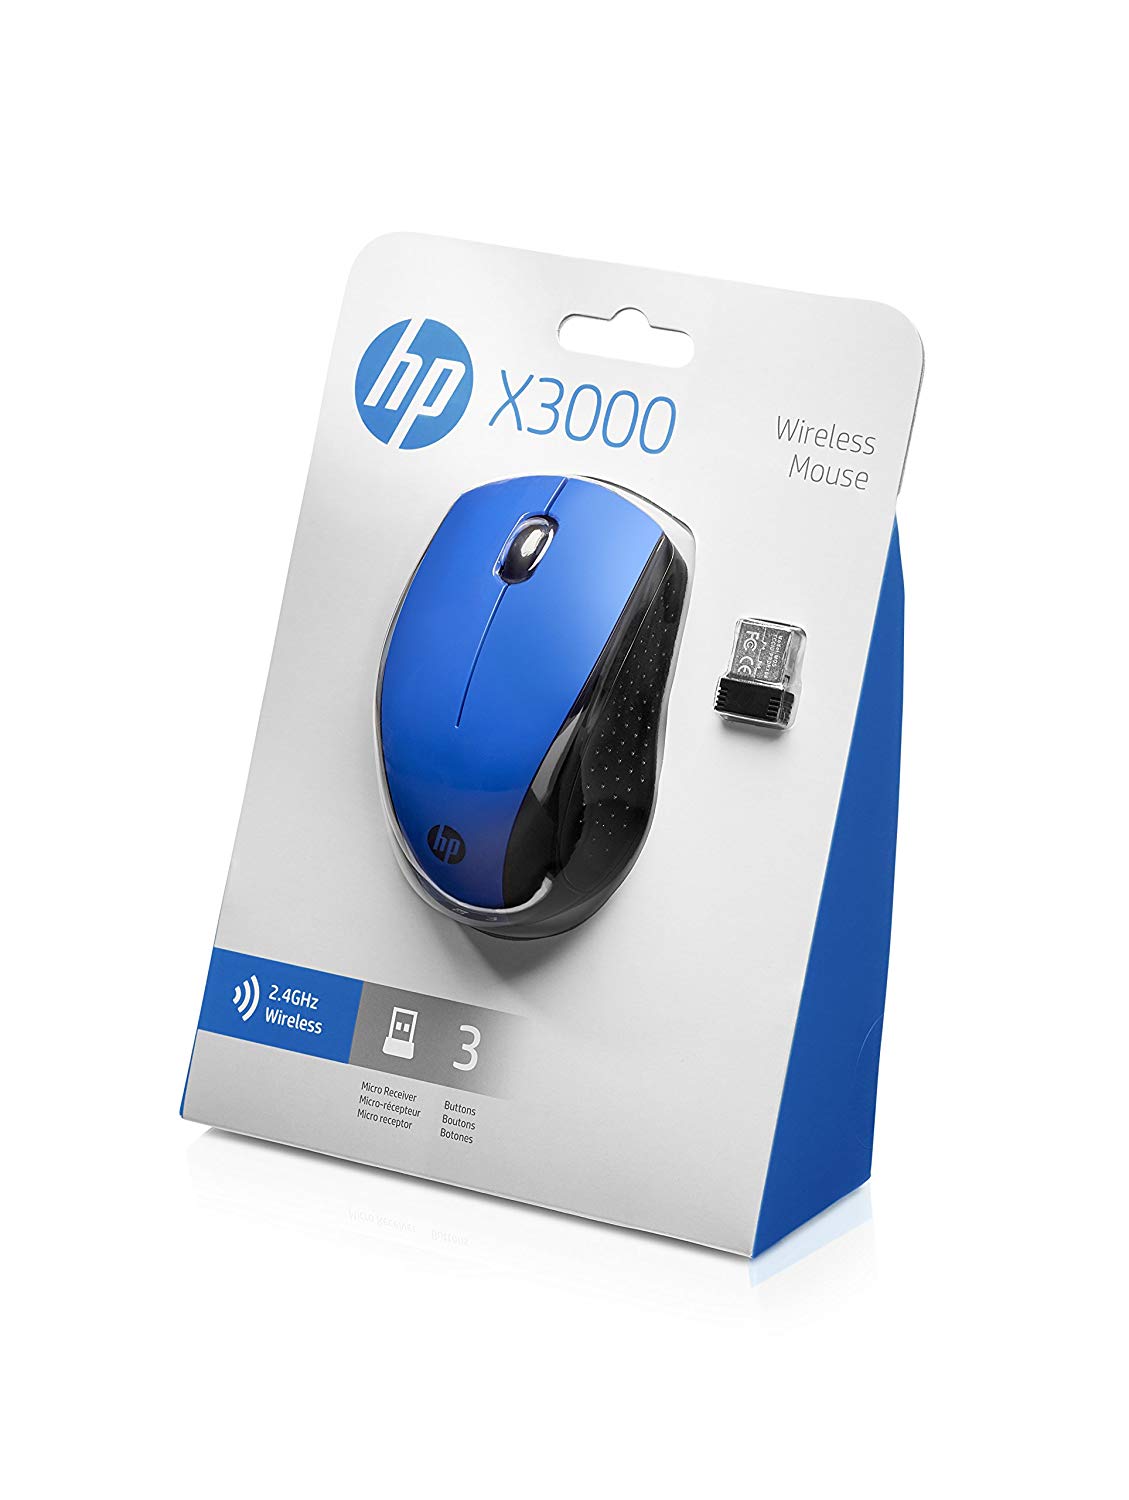 hp wireless mouse x3000 specs